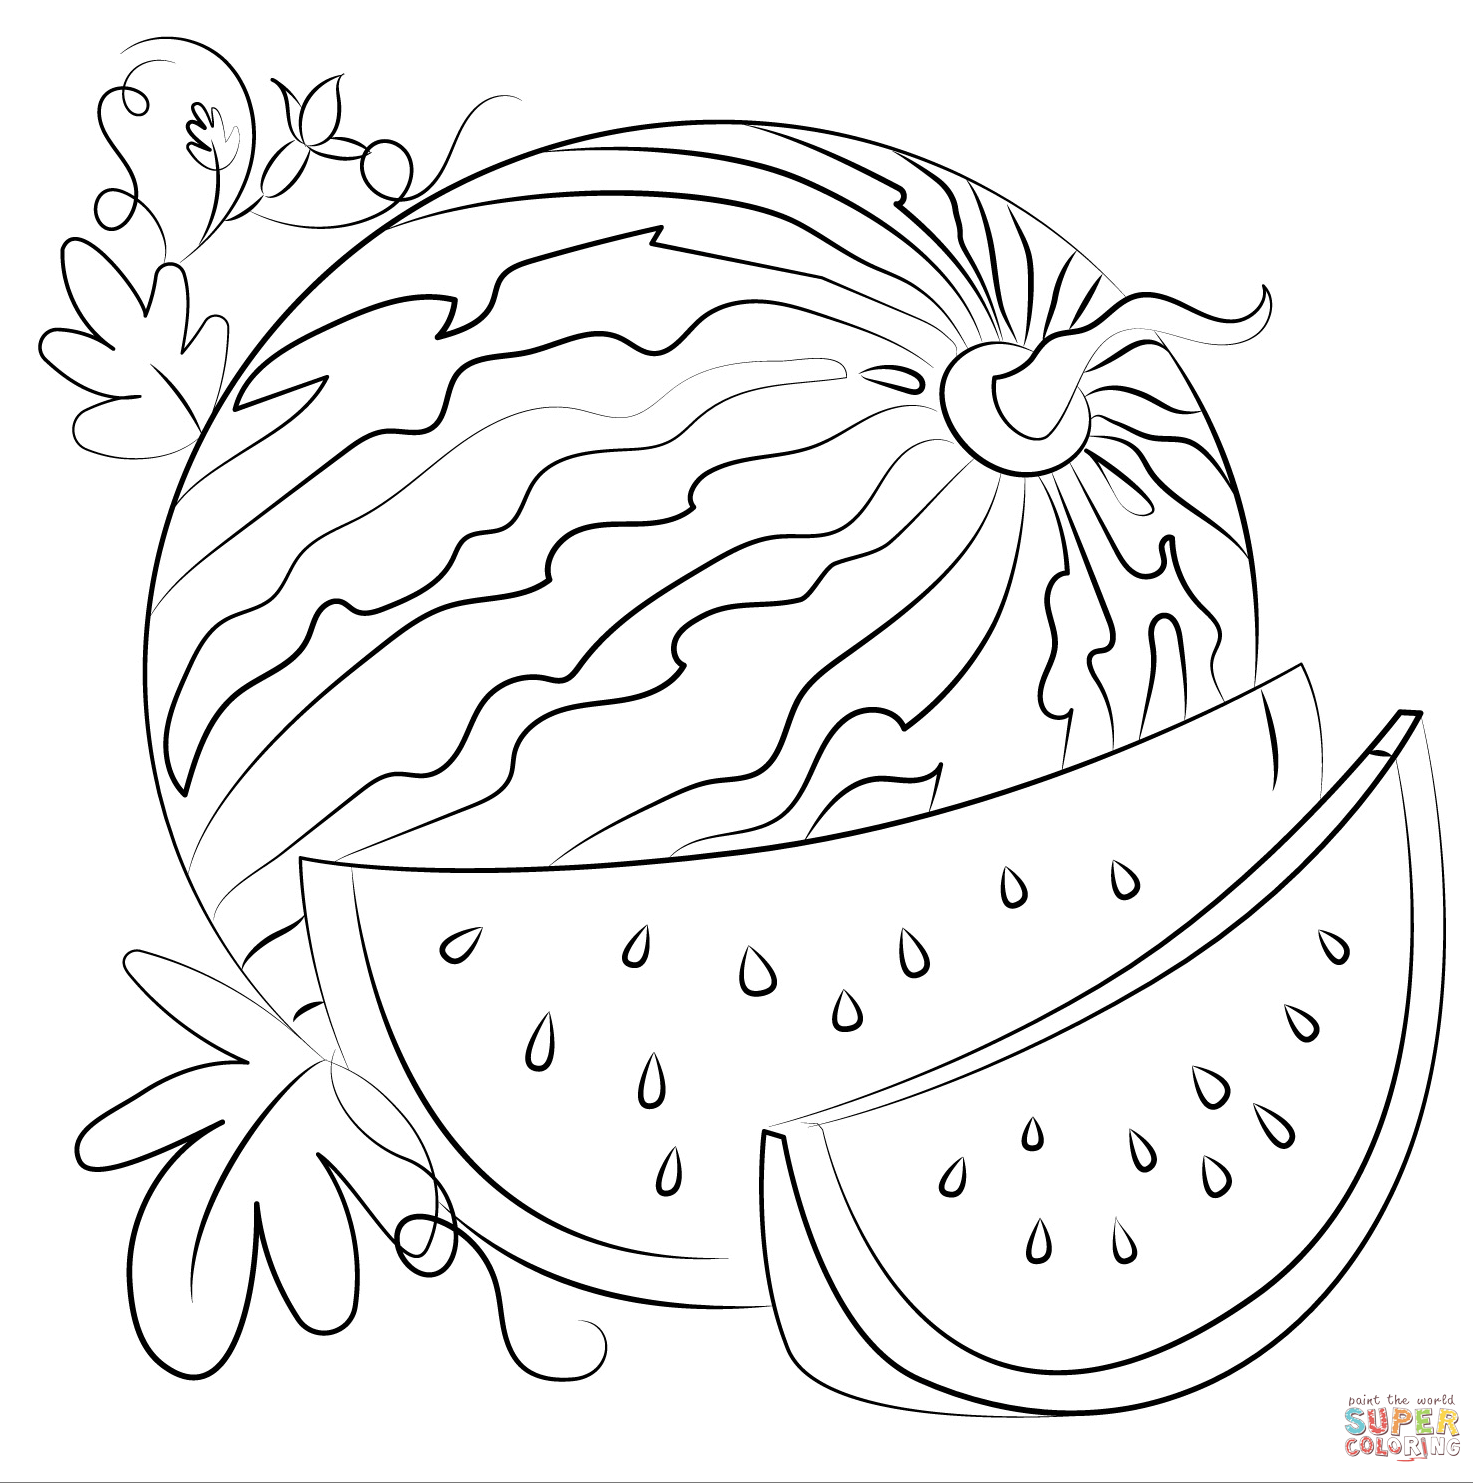 Watermelon for Children Coloring Page